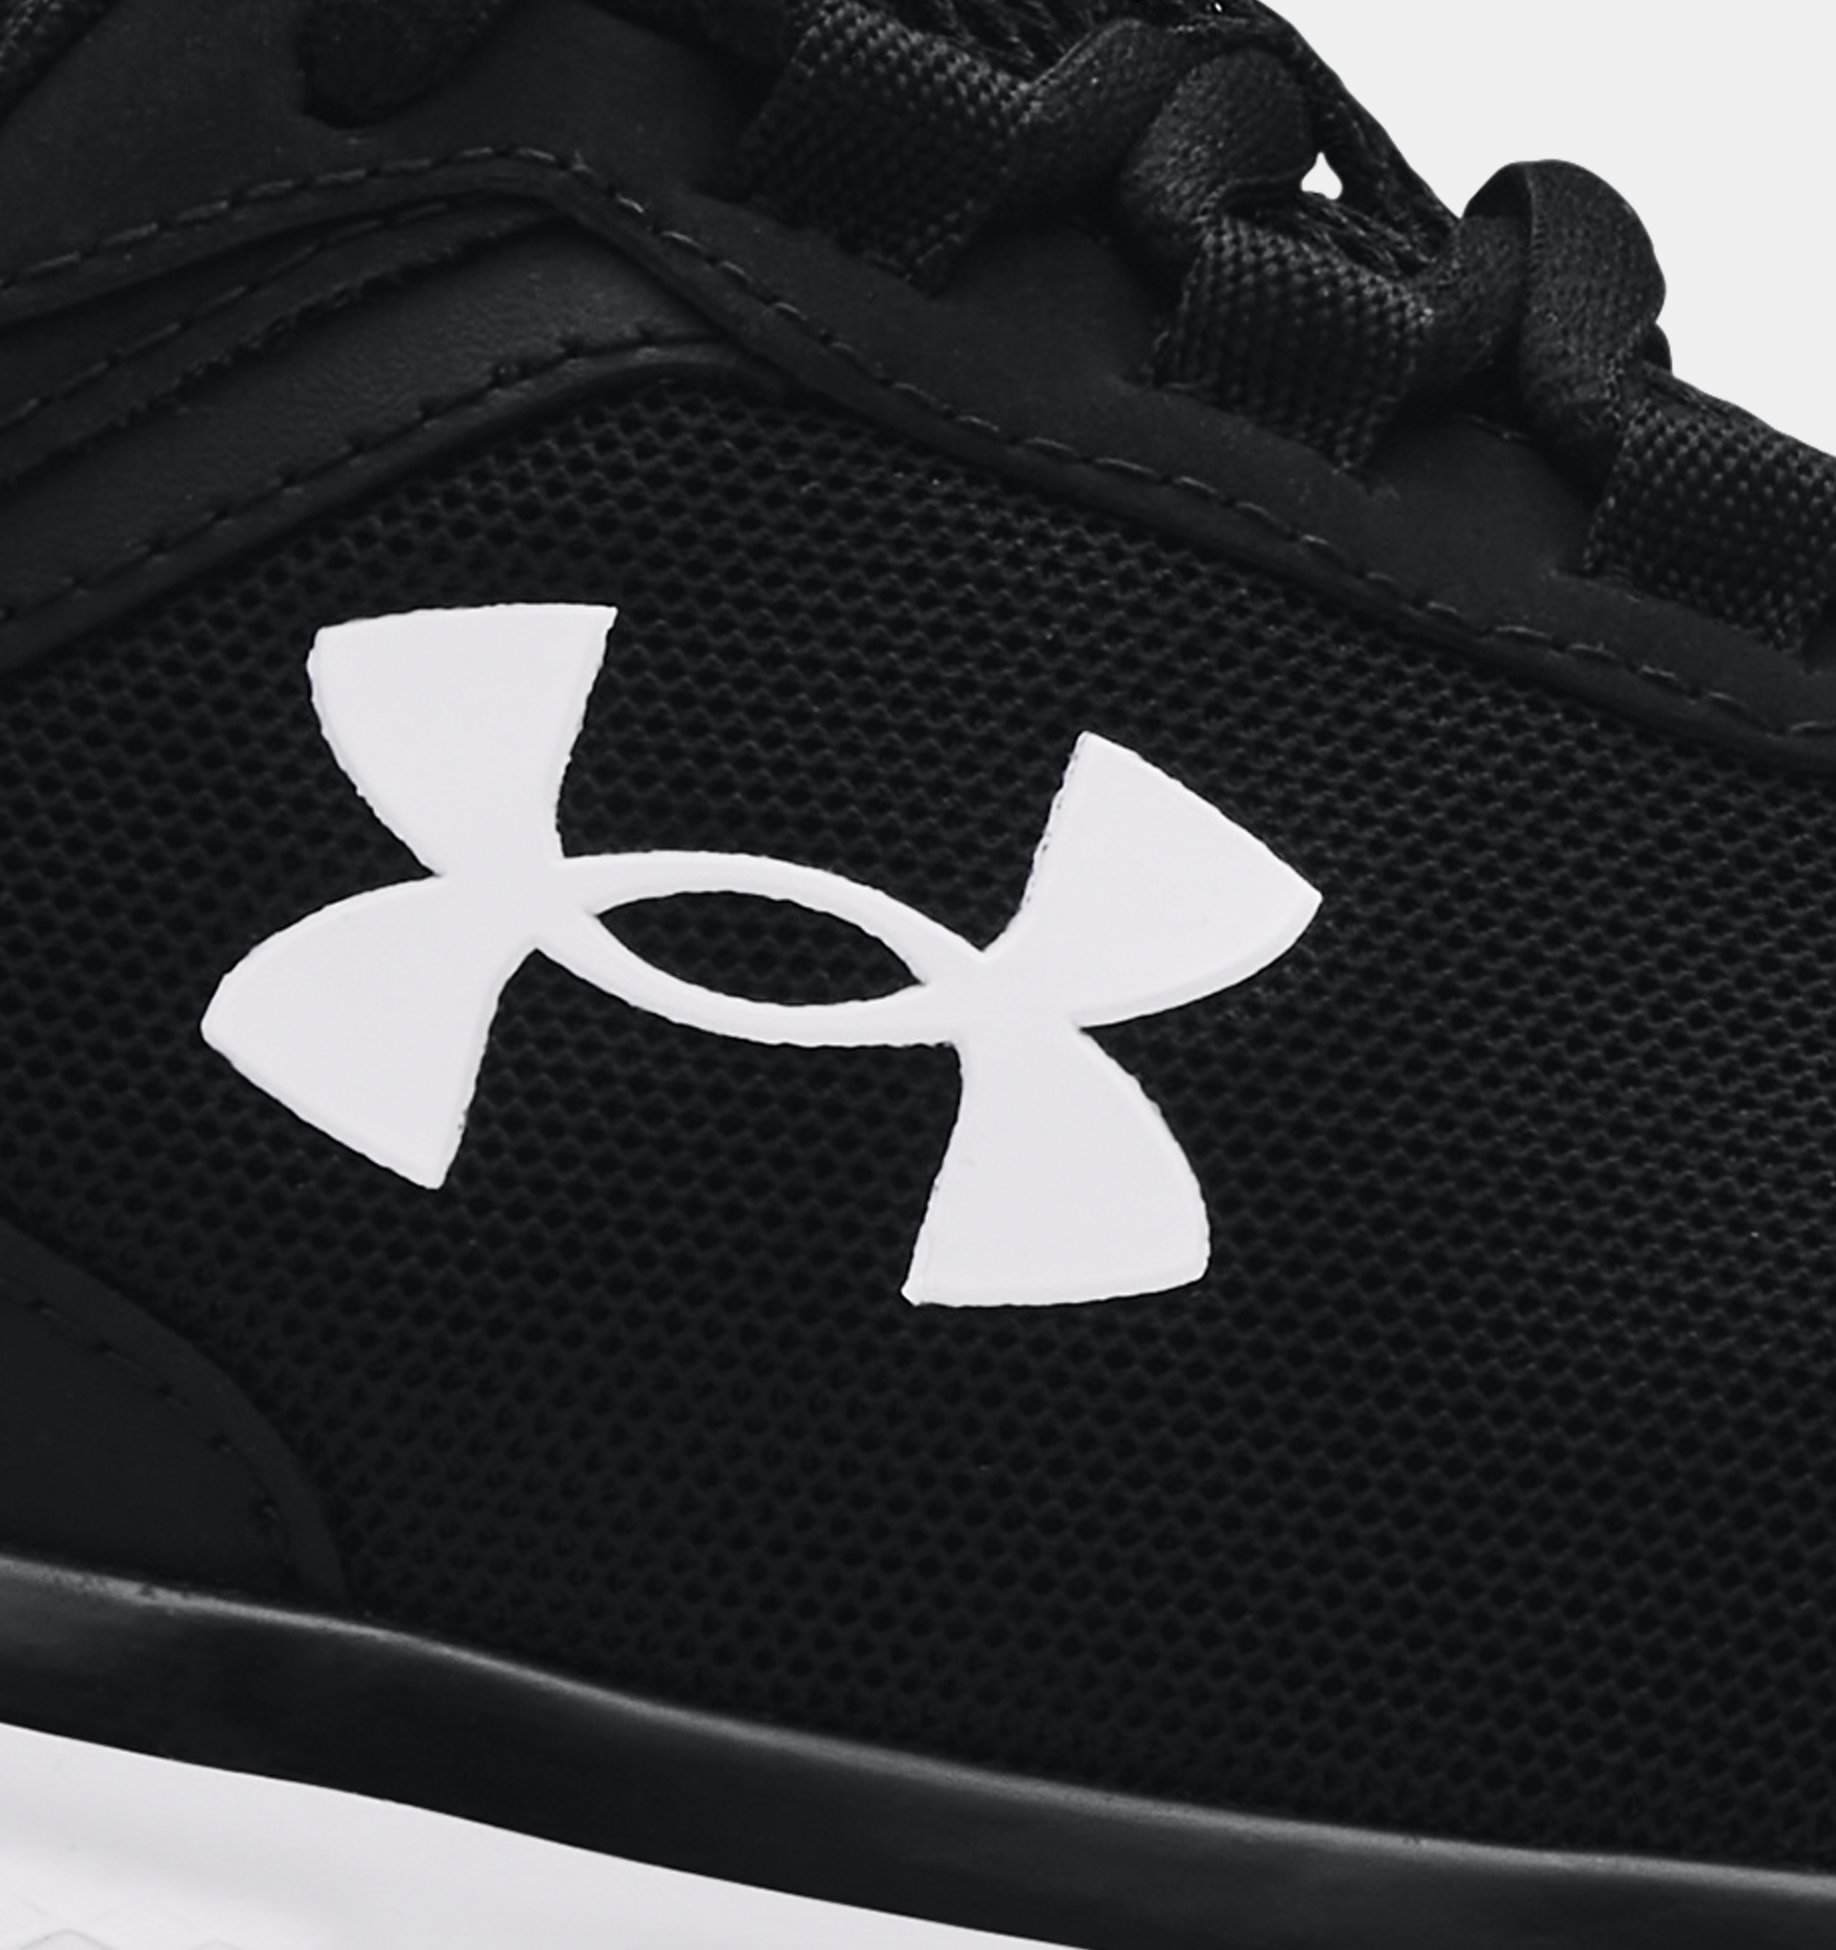 Are Under Armour Hood Shoes for Women?